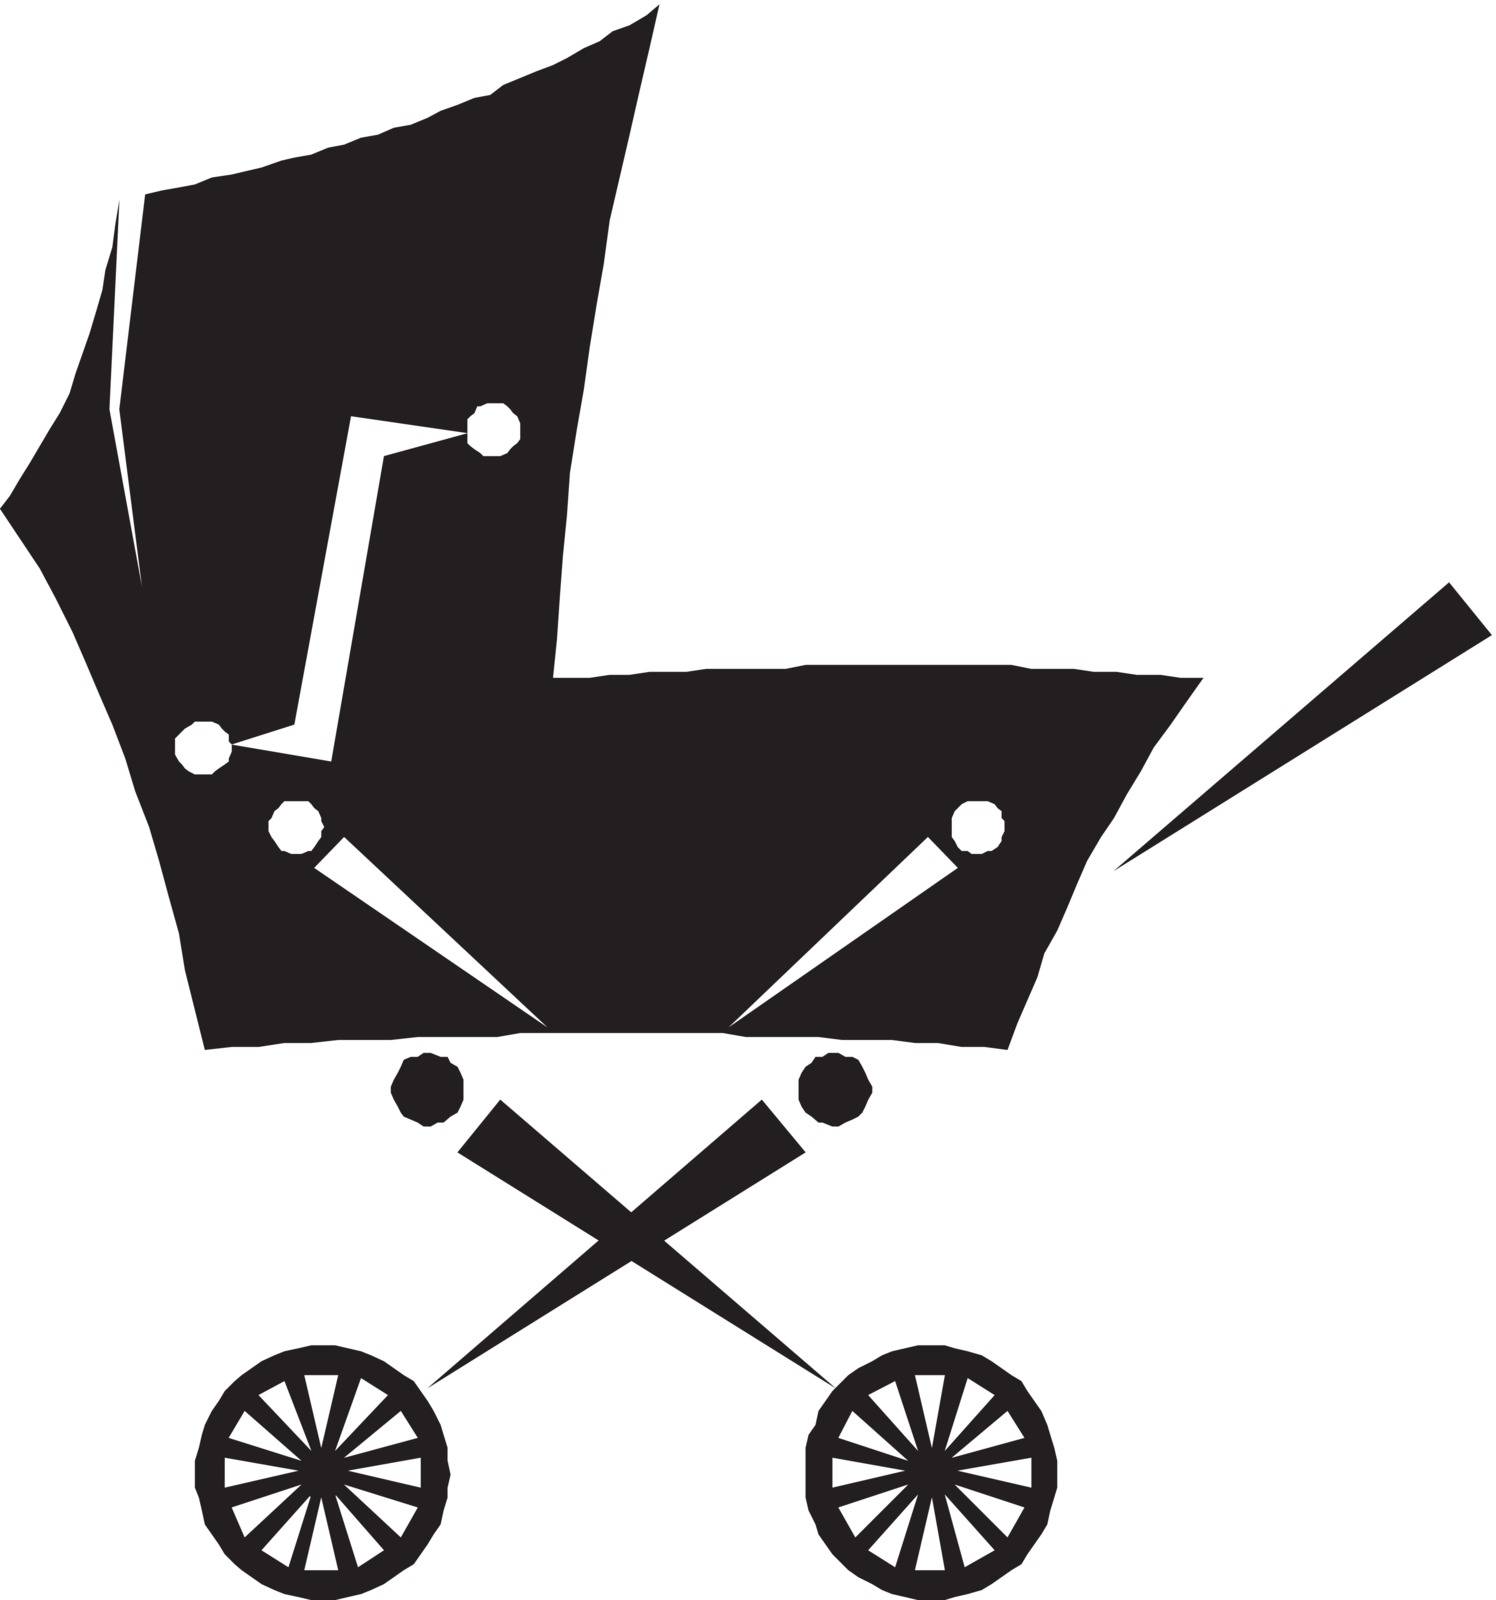 pram - baby carriage silhouette by yurka